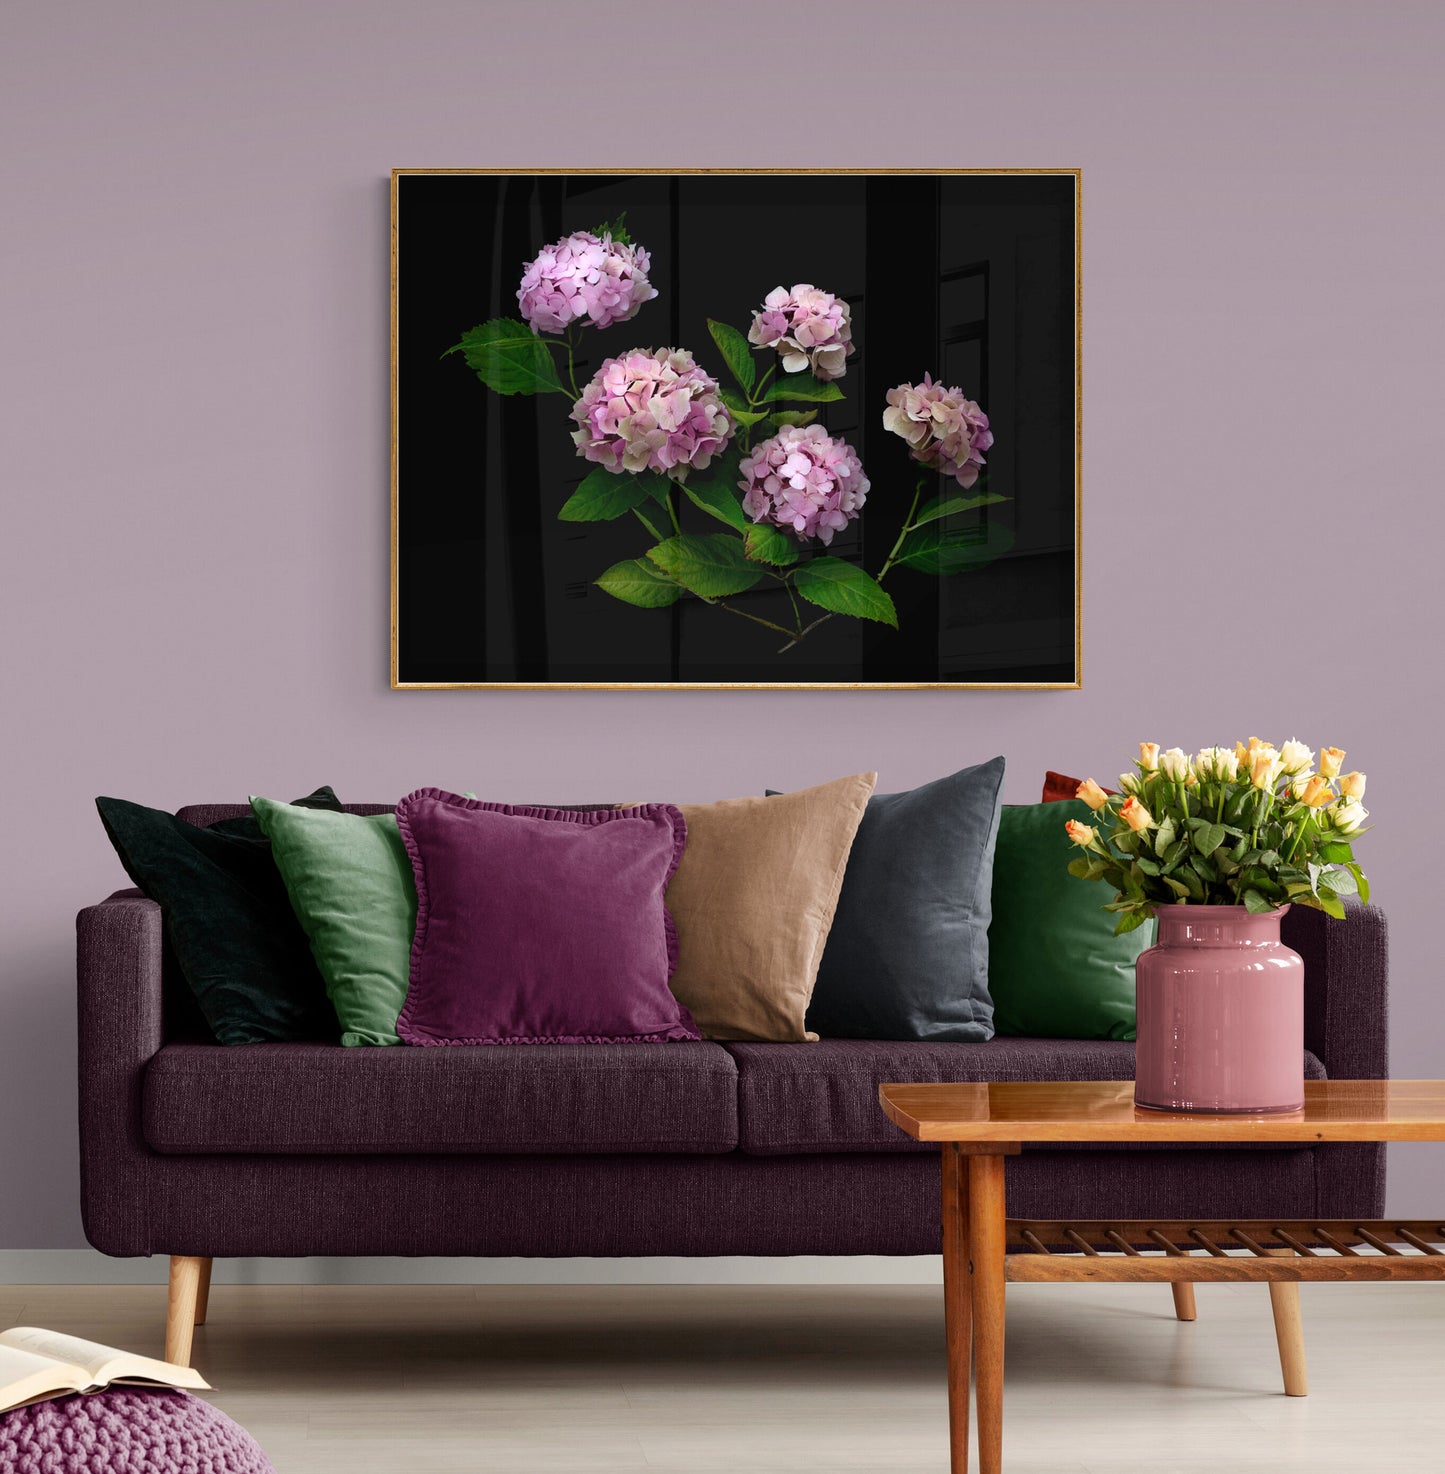 Dark botanical print of pink Hydrangeas on a black background, framed and hung on a lilac coloured wall above a sofa.